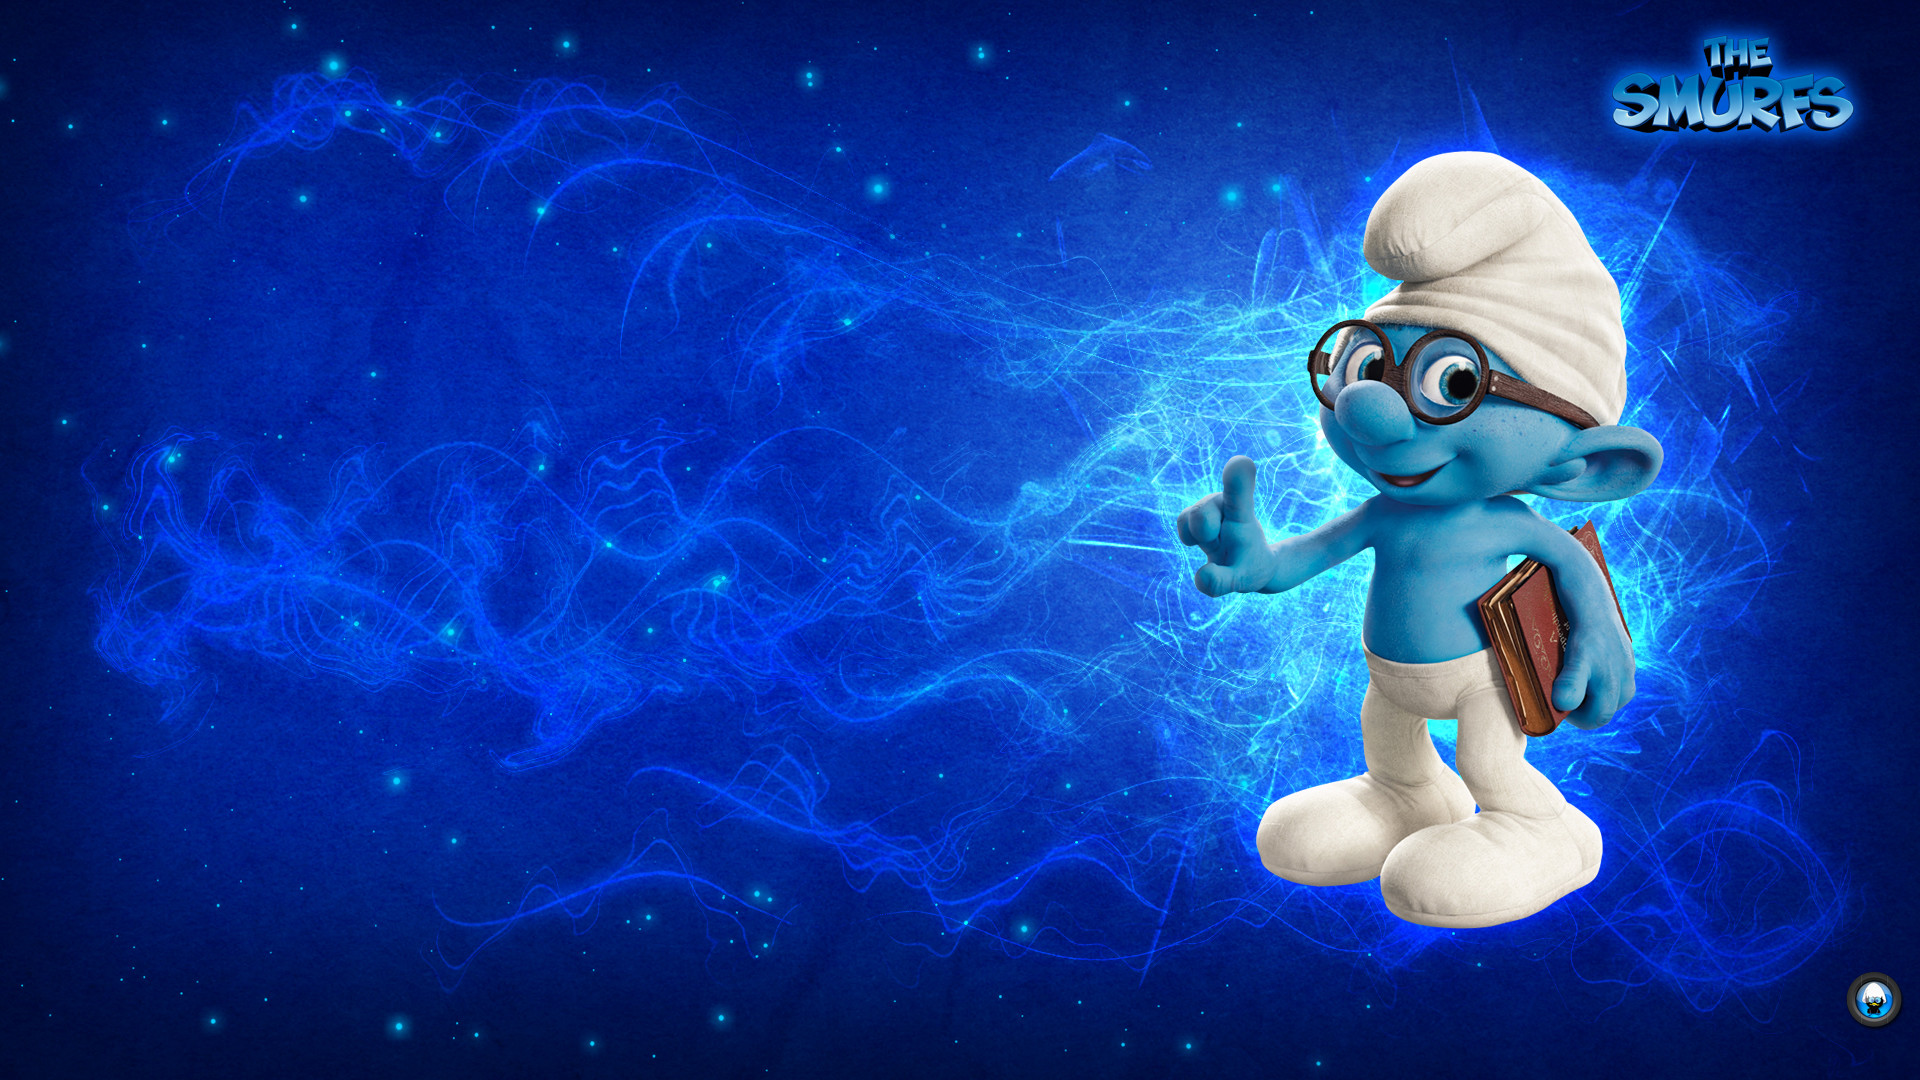 530688 1920x2968 hefty smurf free download wallpaper for pc  Rare Gallery  HD Wallpapers